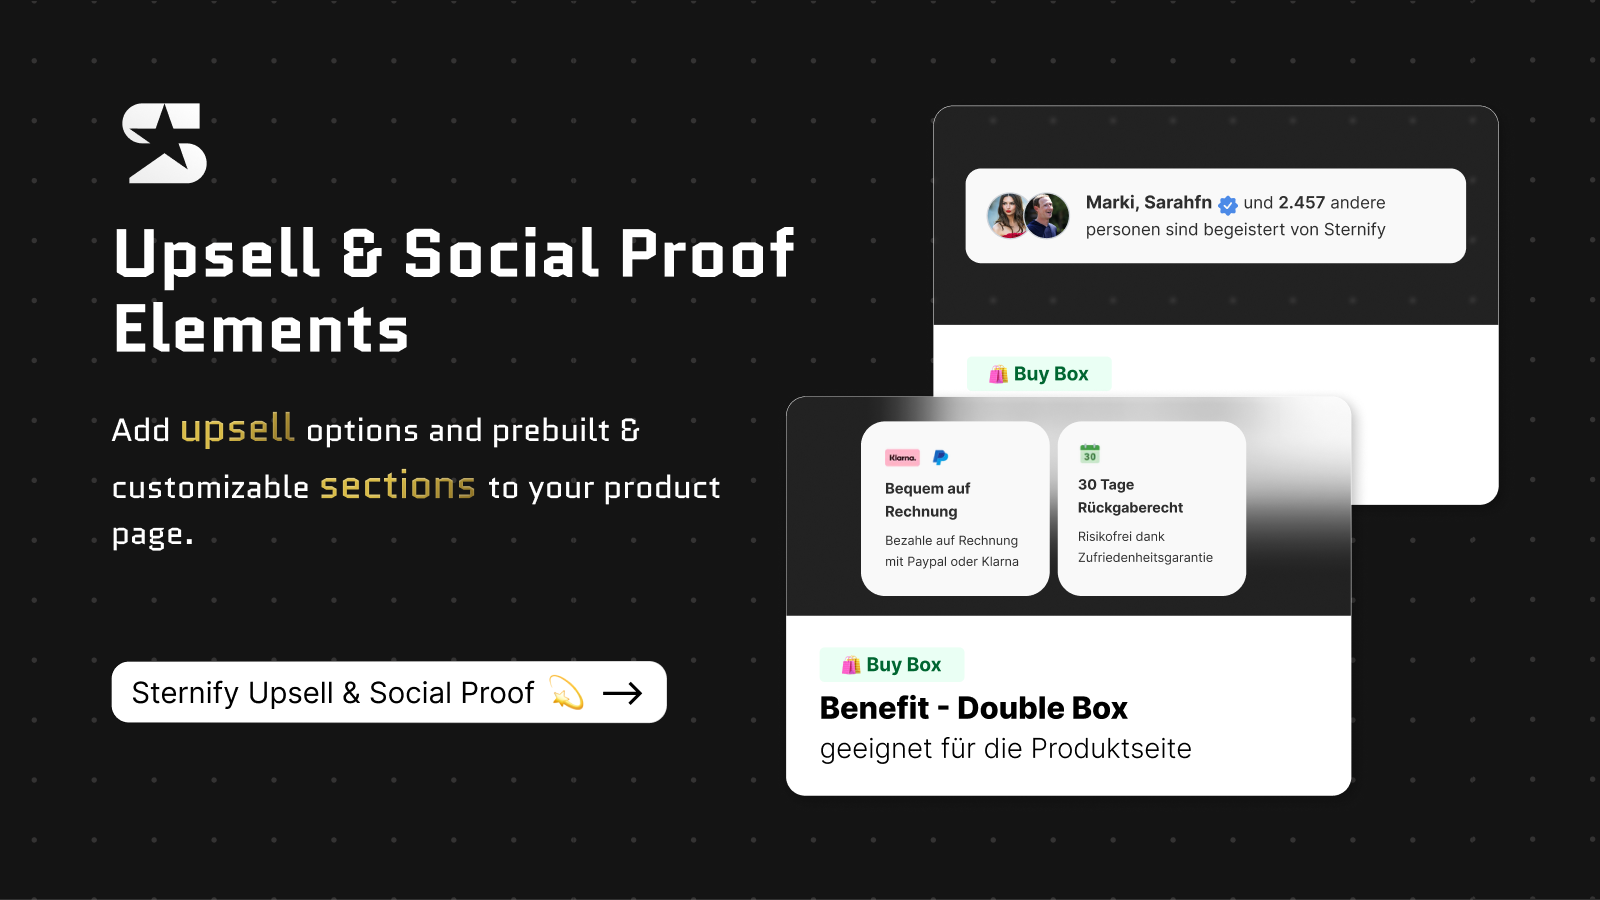 Upsell and Social Prrof Elements